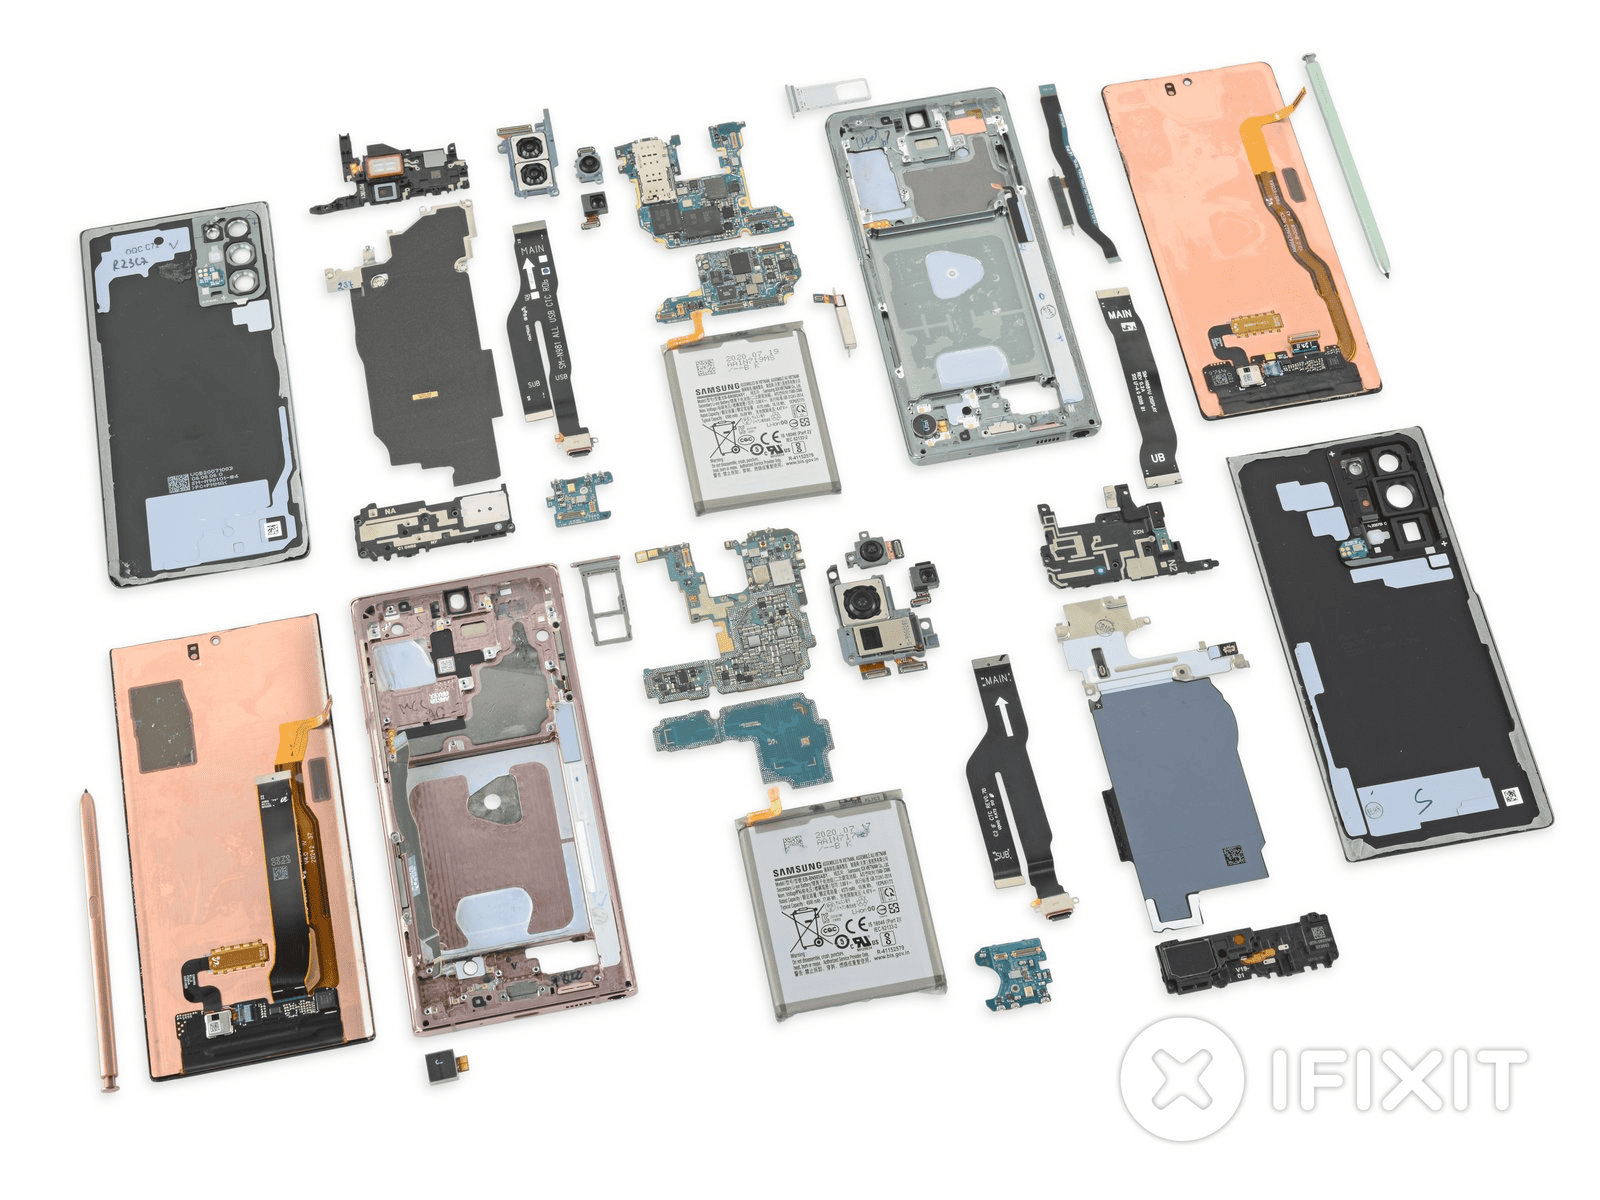 Samsung Galaxy Note 20 scores 3 on iFixit’s repairability scale